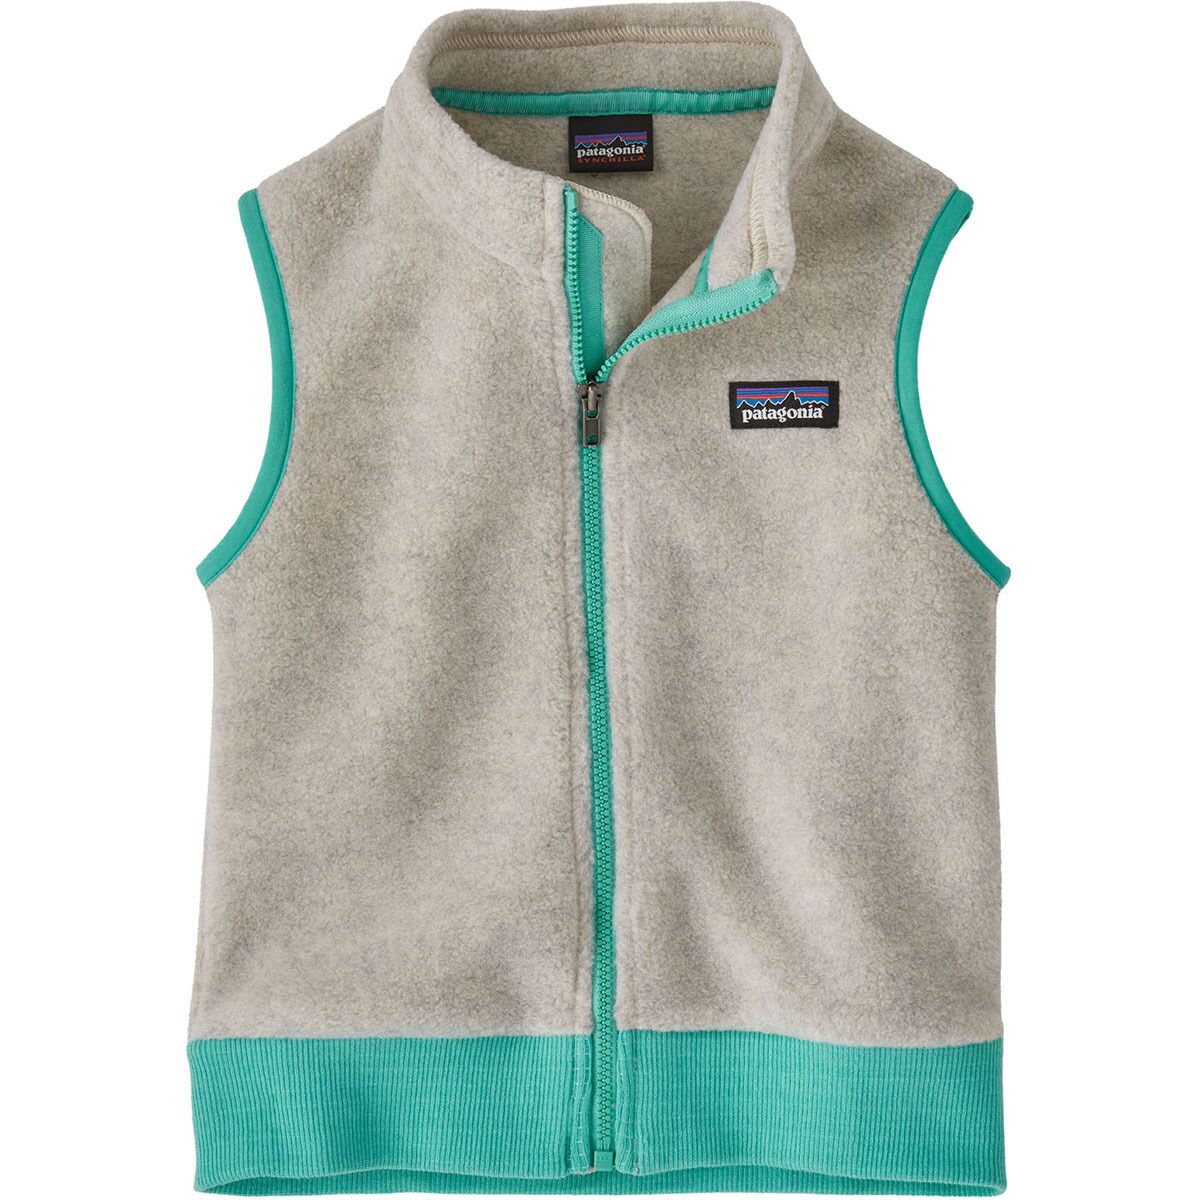 Patagonia Baby Synch Vest - Toddler Girls'